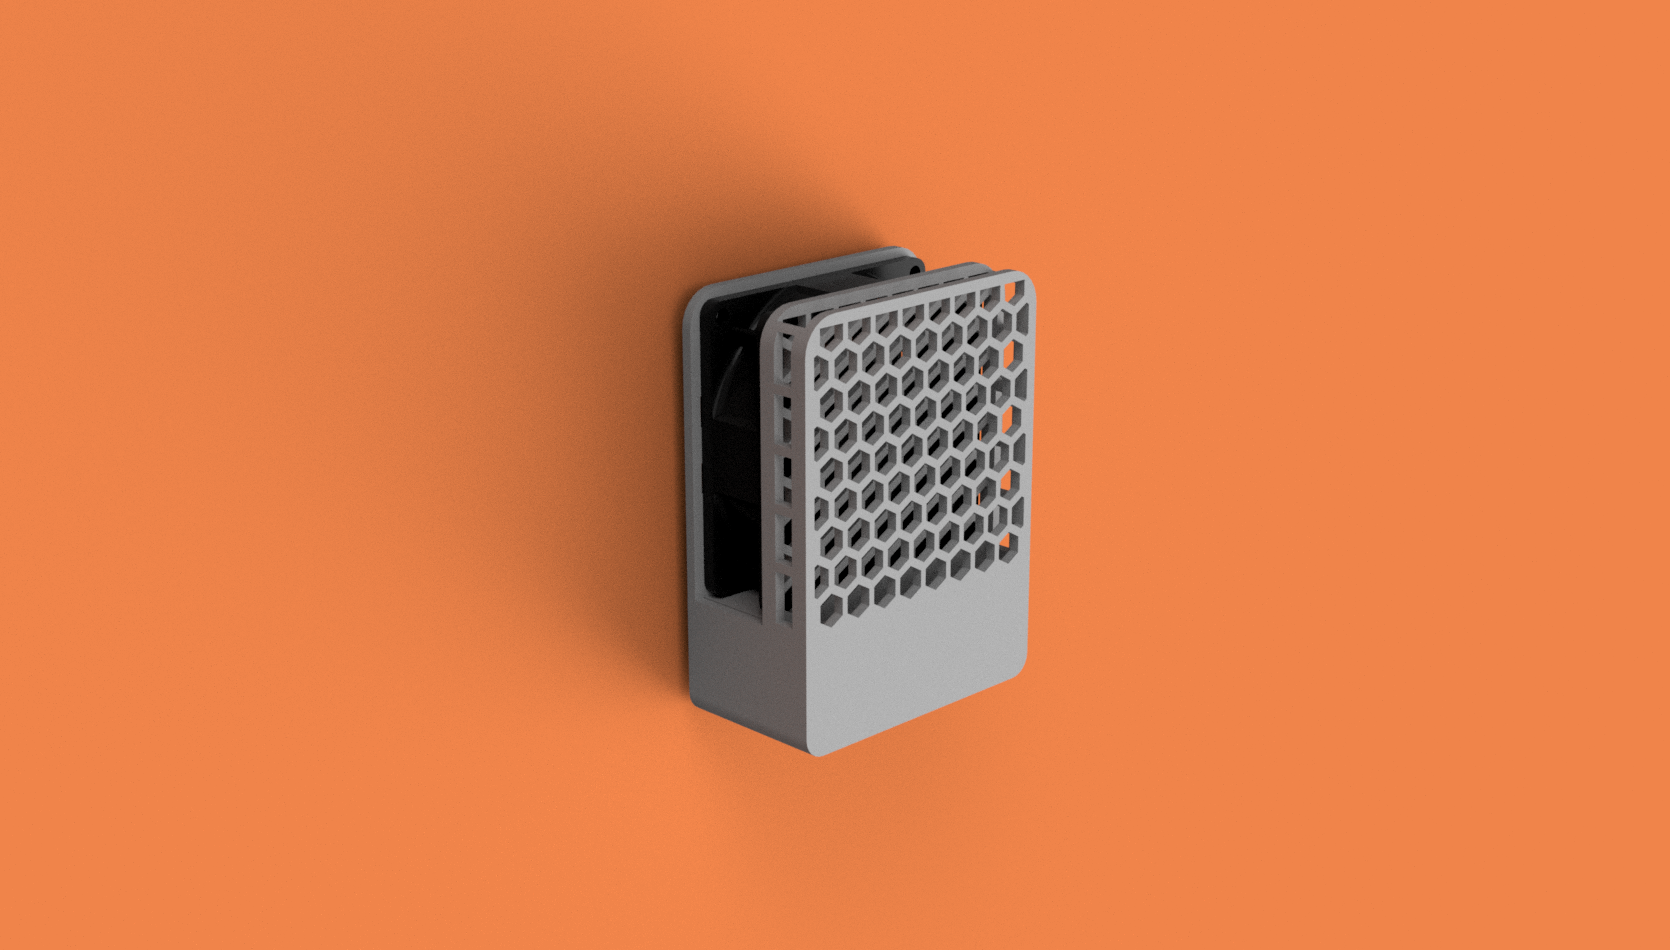 Complete Final Render of the Smoke extractor